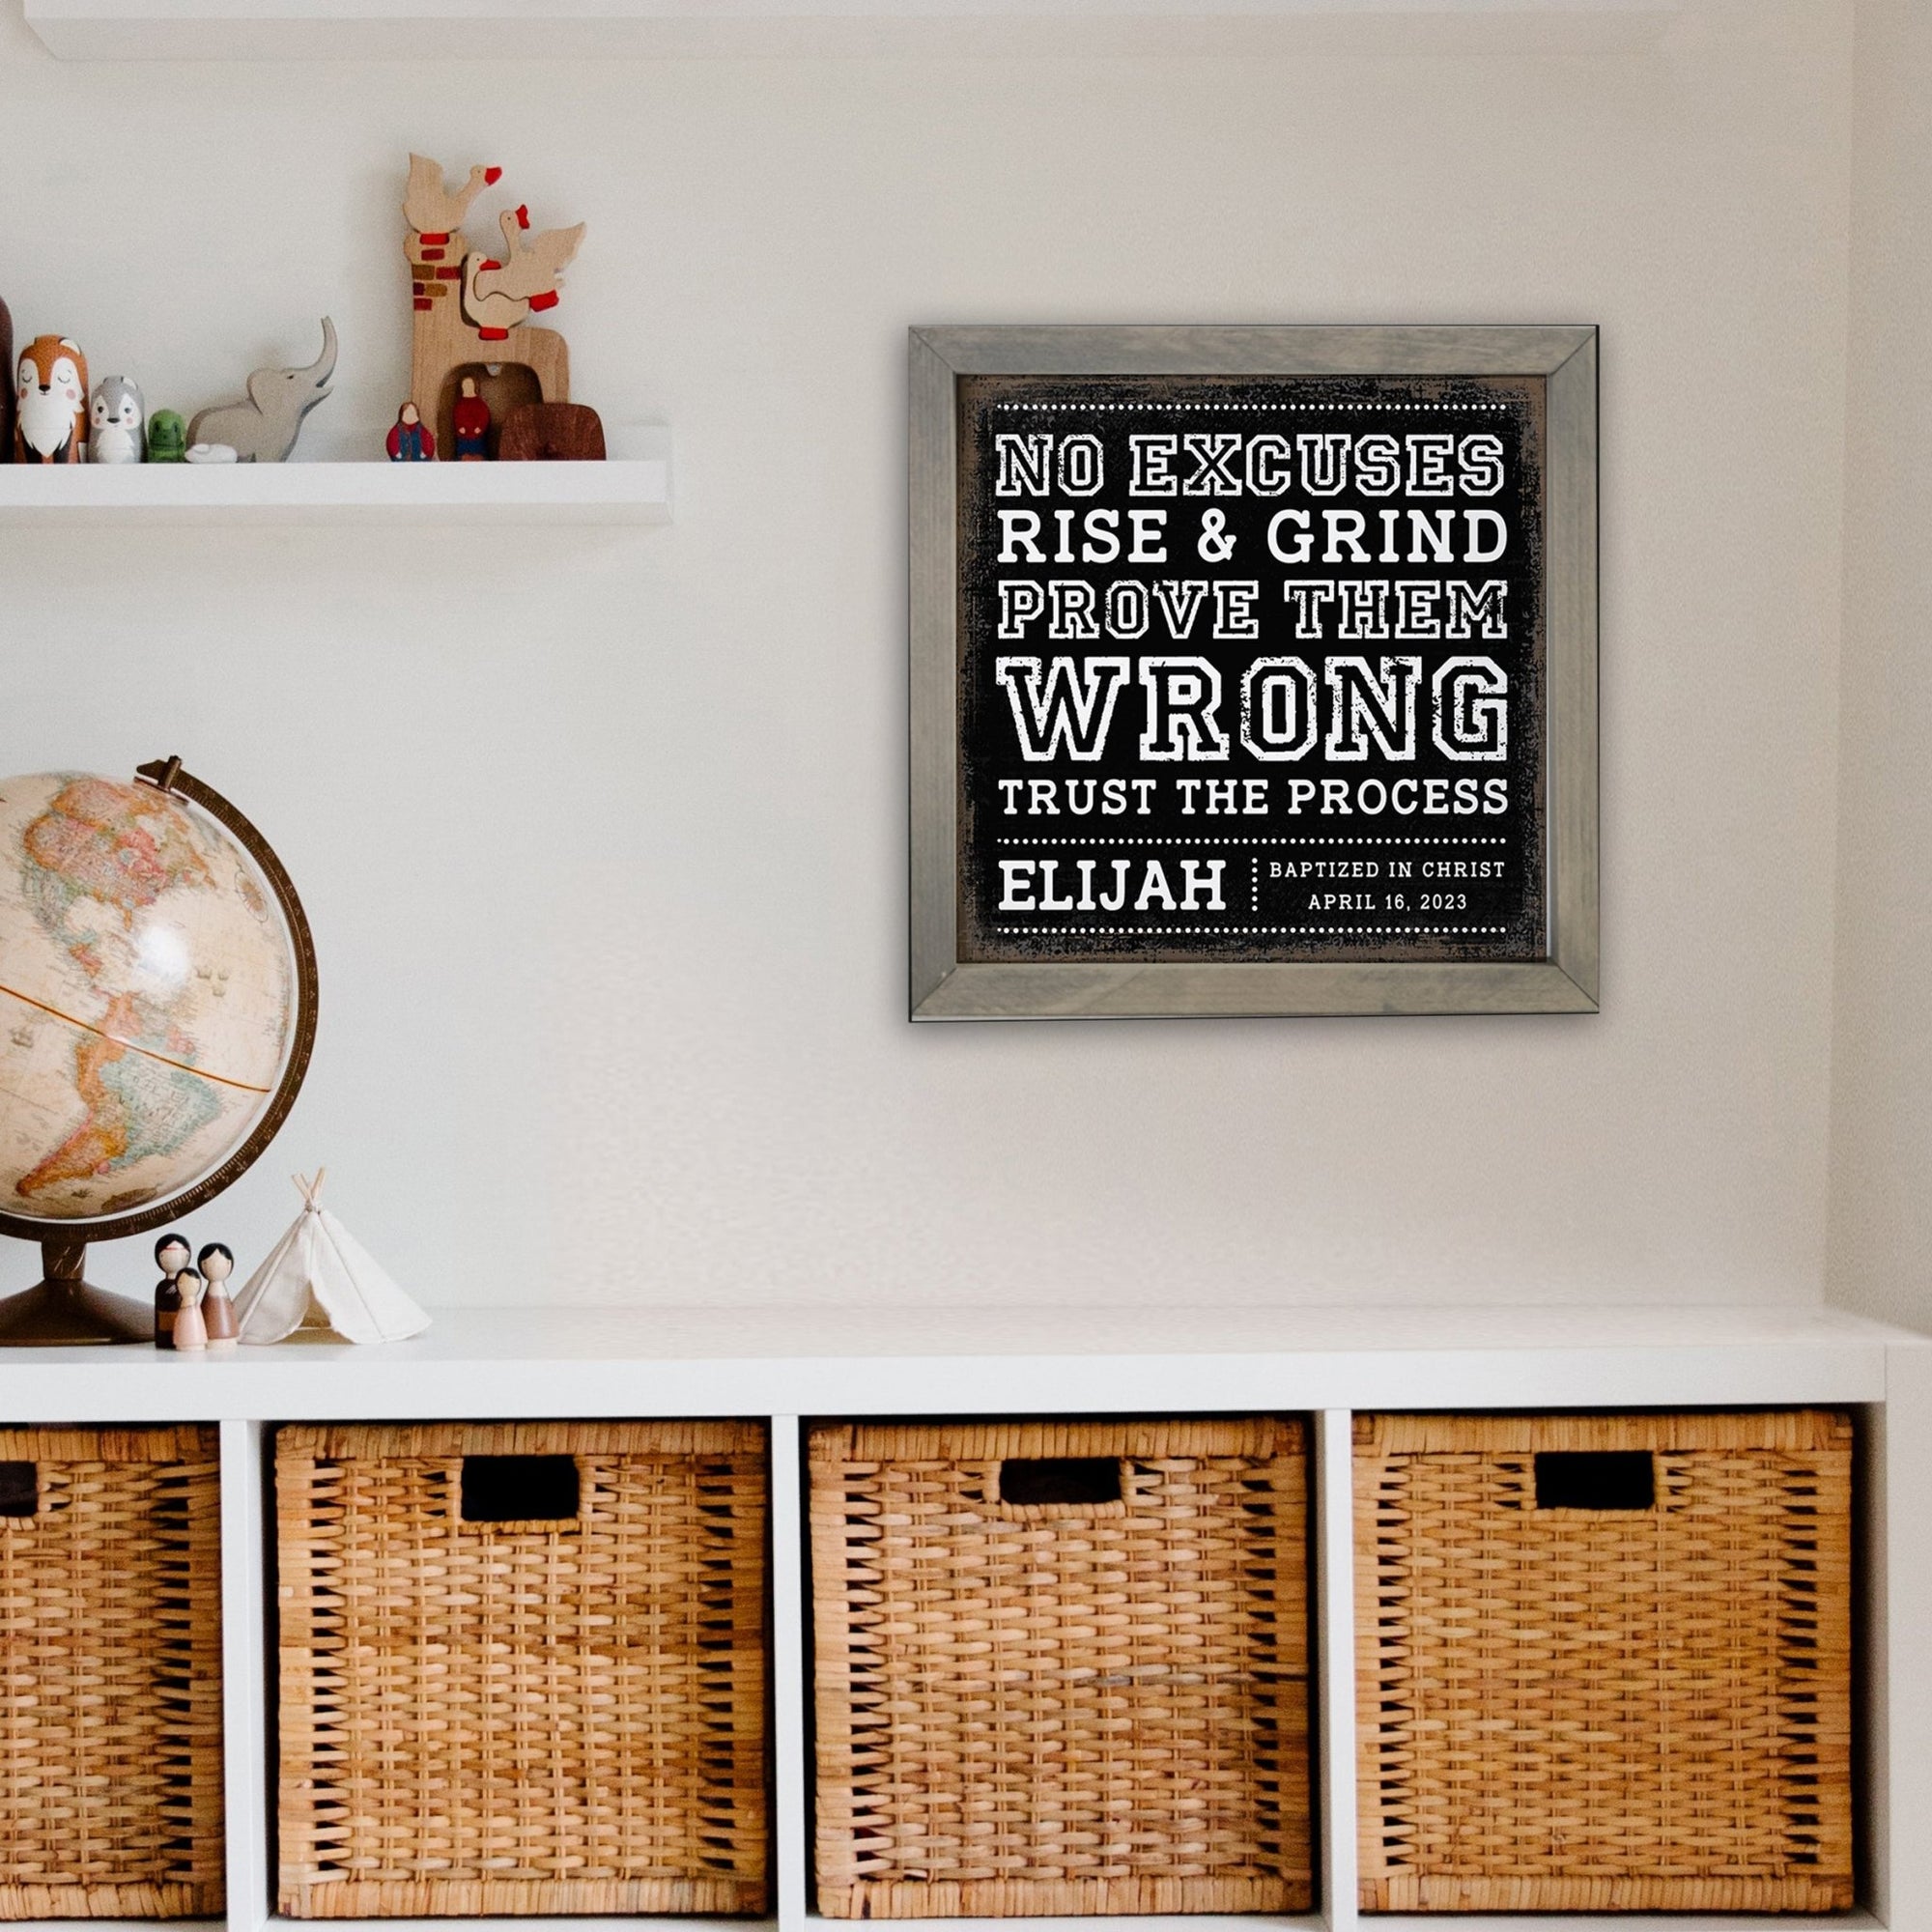 Personalized Elegant Baseball Framed Shadow Box Shelf Décor With Inspiring Bible Verses - No Excuses - LifeSong Milestones